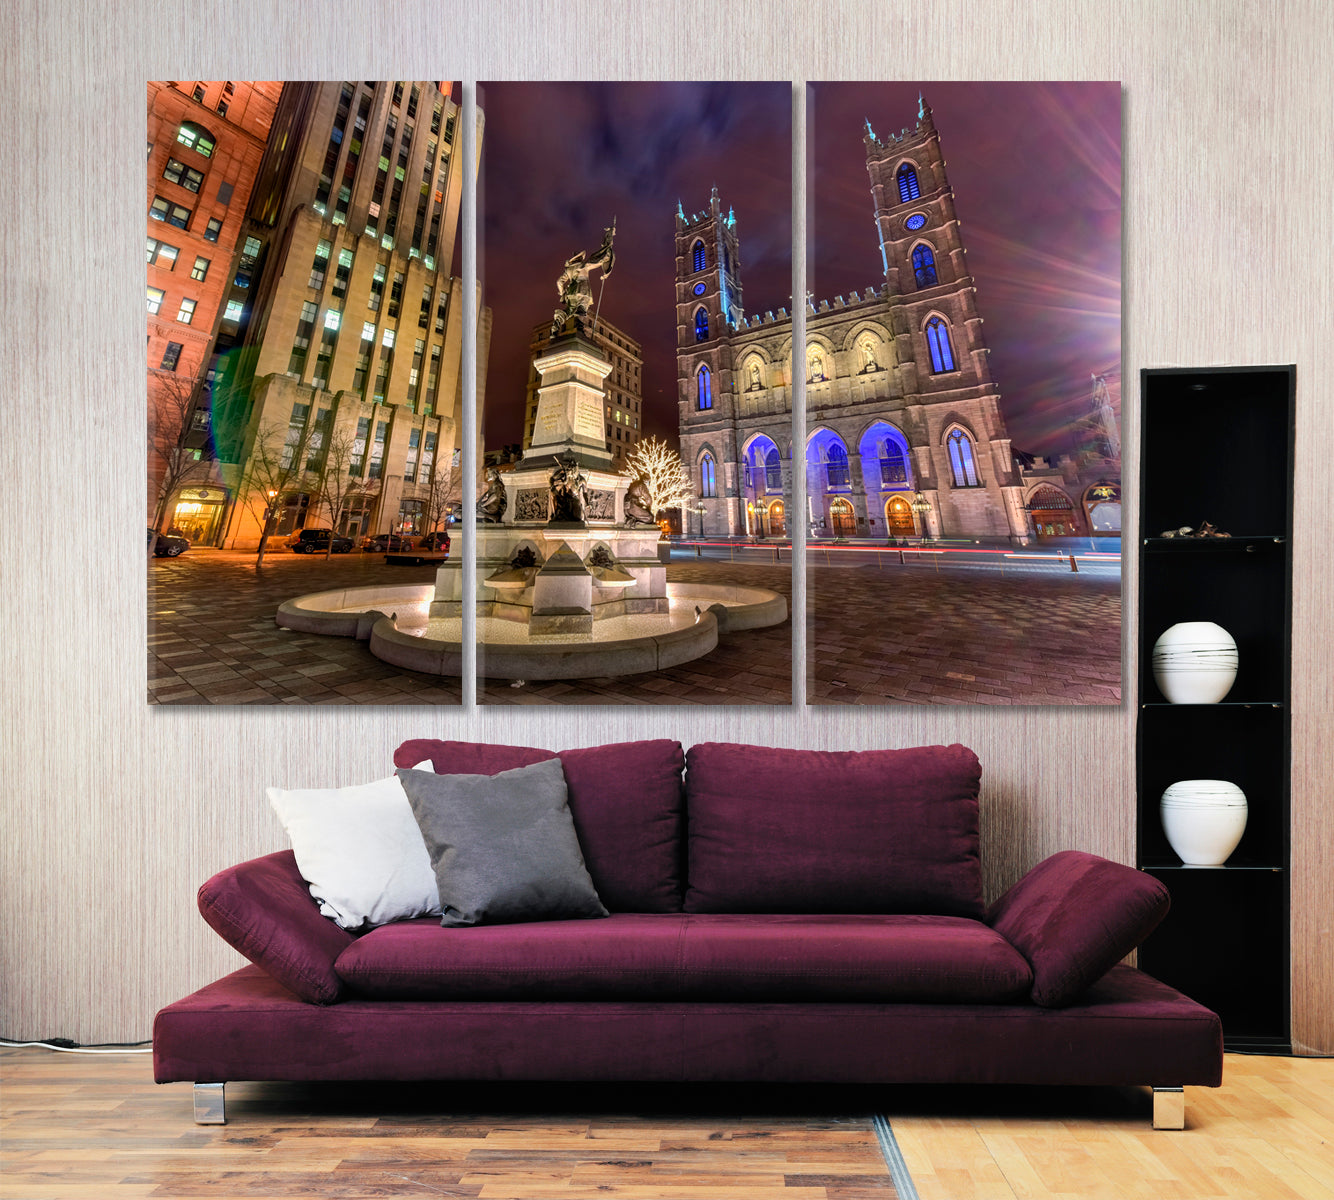 PLACE D'ARMES Montreal Notre-Dame Basilica Quebec Canada Photo Canvas Print Cities Wall Art Artesty 3 panels 36" x 24" 